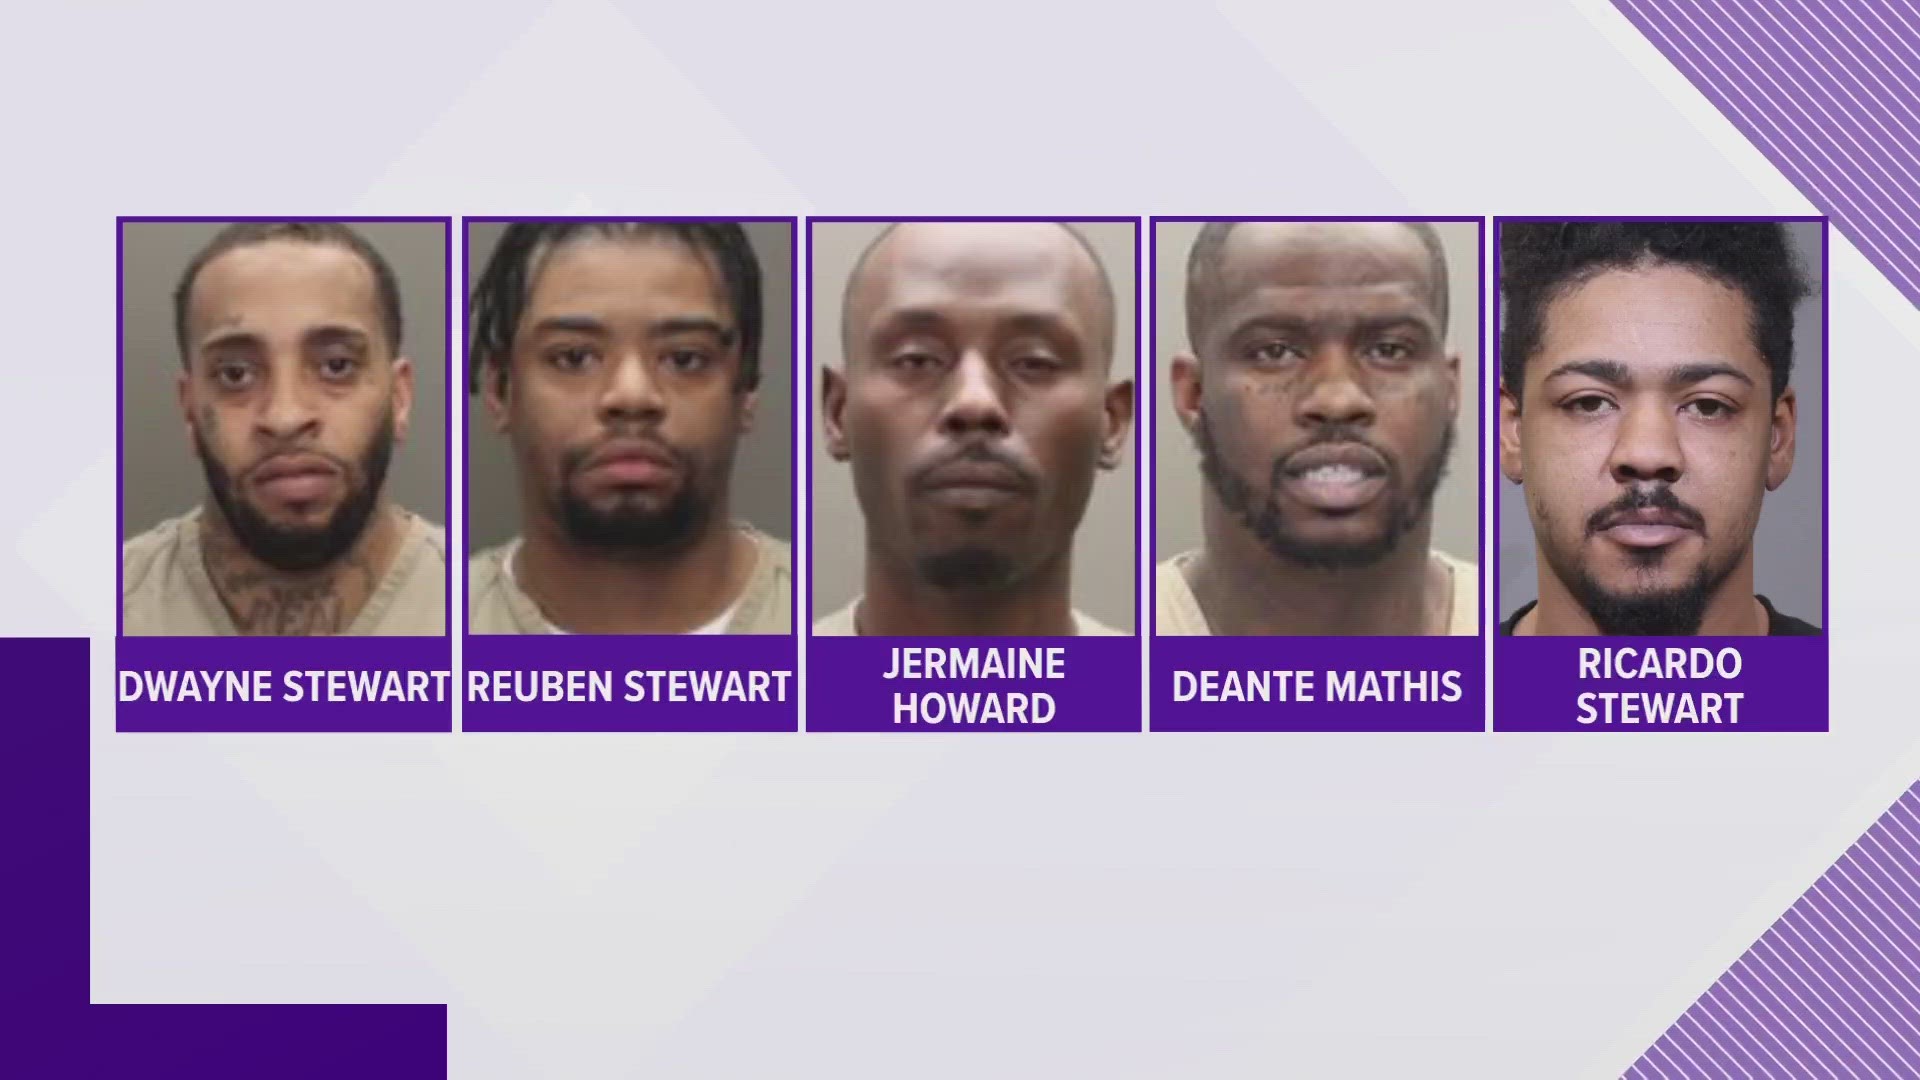 Five men were indicted by a grand jury for a total of 63 felony counts after an investigation prompted by community complaints in Milo-Grogan and North Linden.